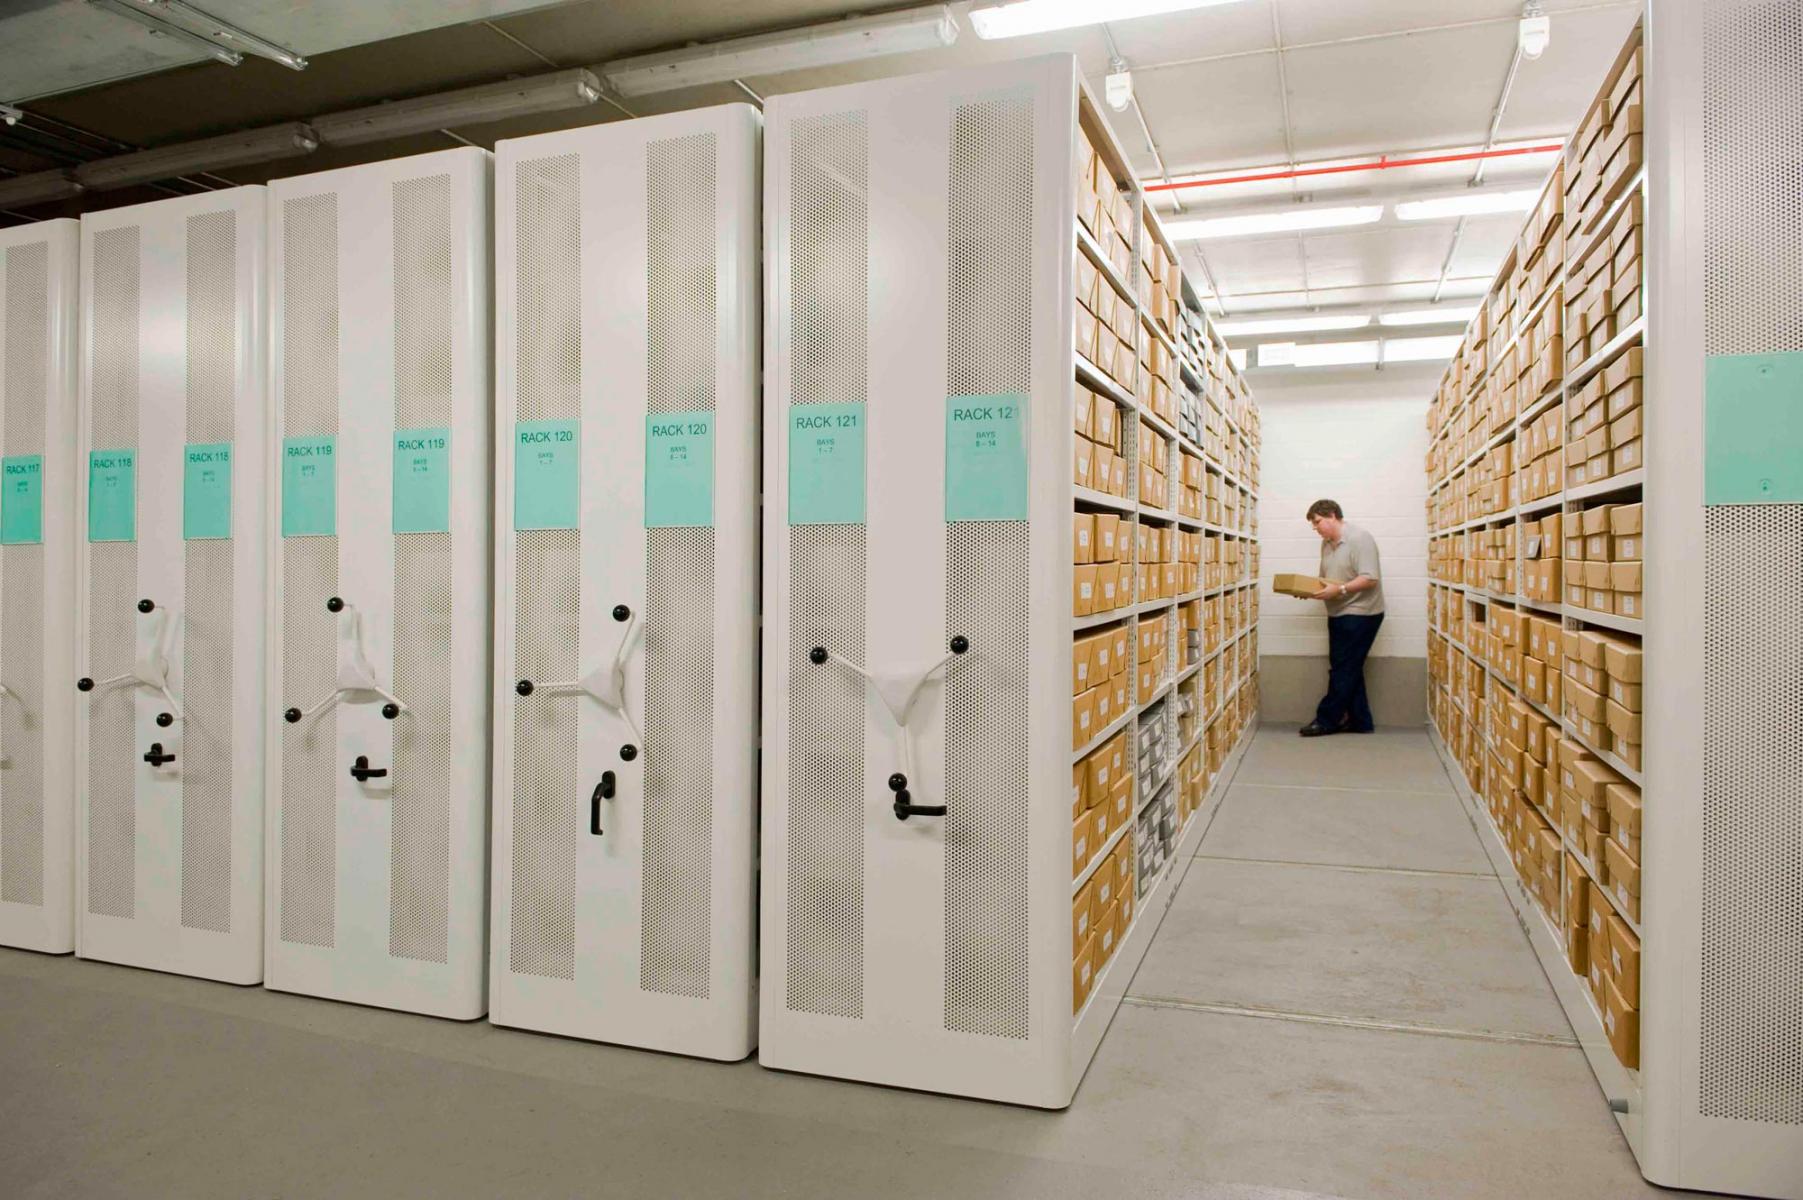 Archive repository